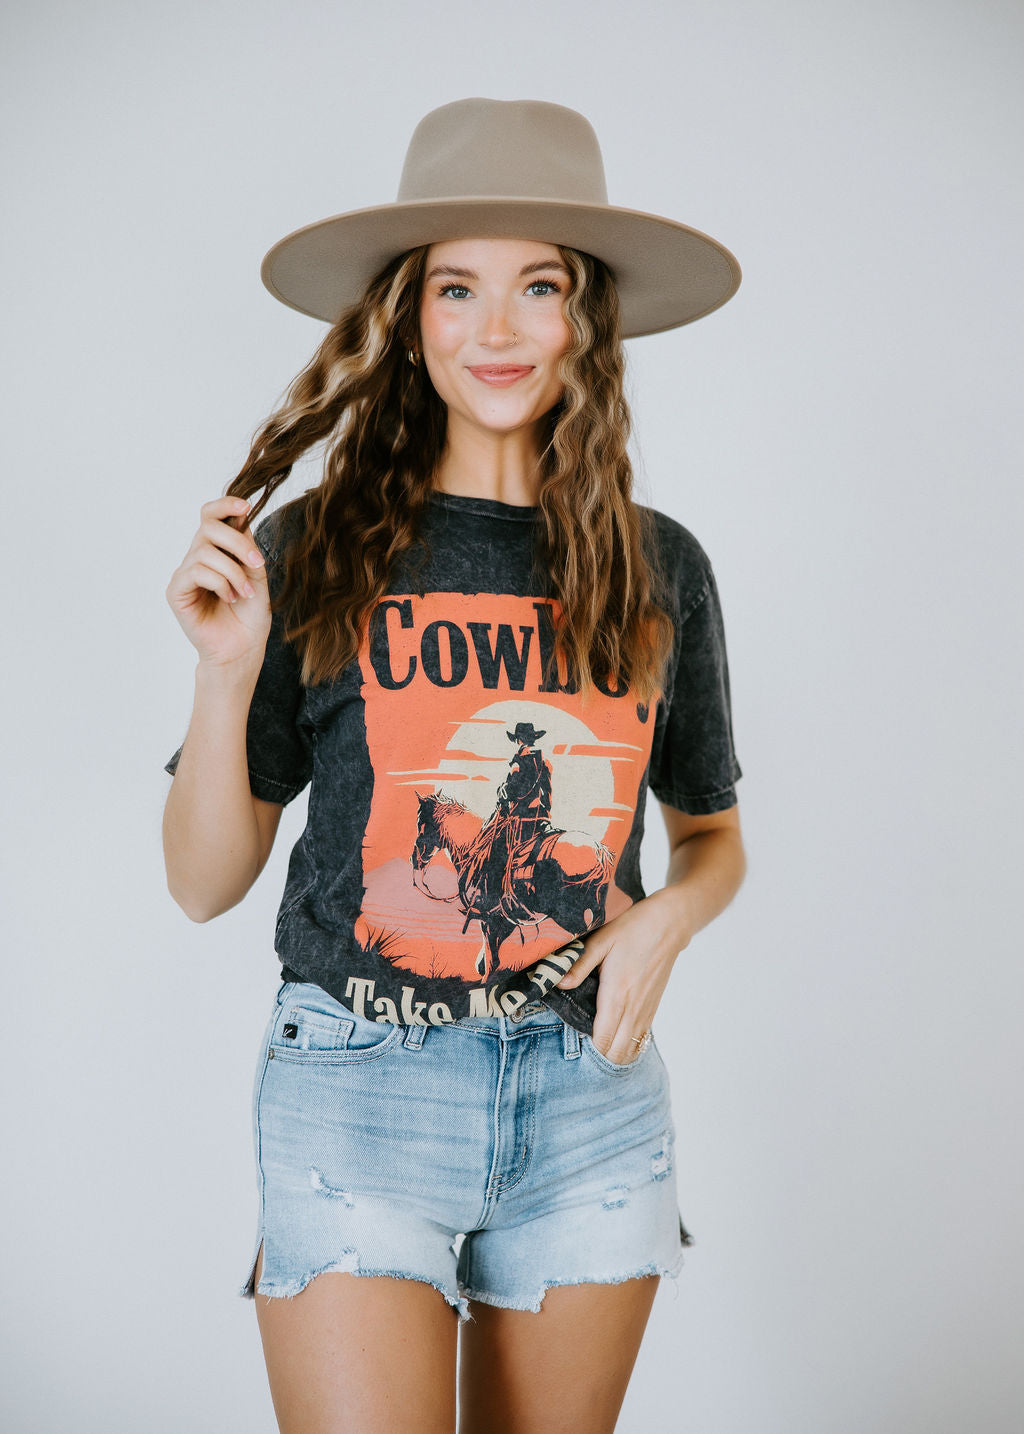 Cowboy Take Me Away Country Graphic Tee - T Shirt Dress - Mineral Wash Gray